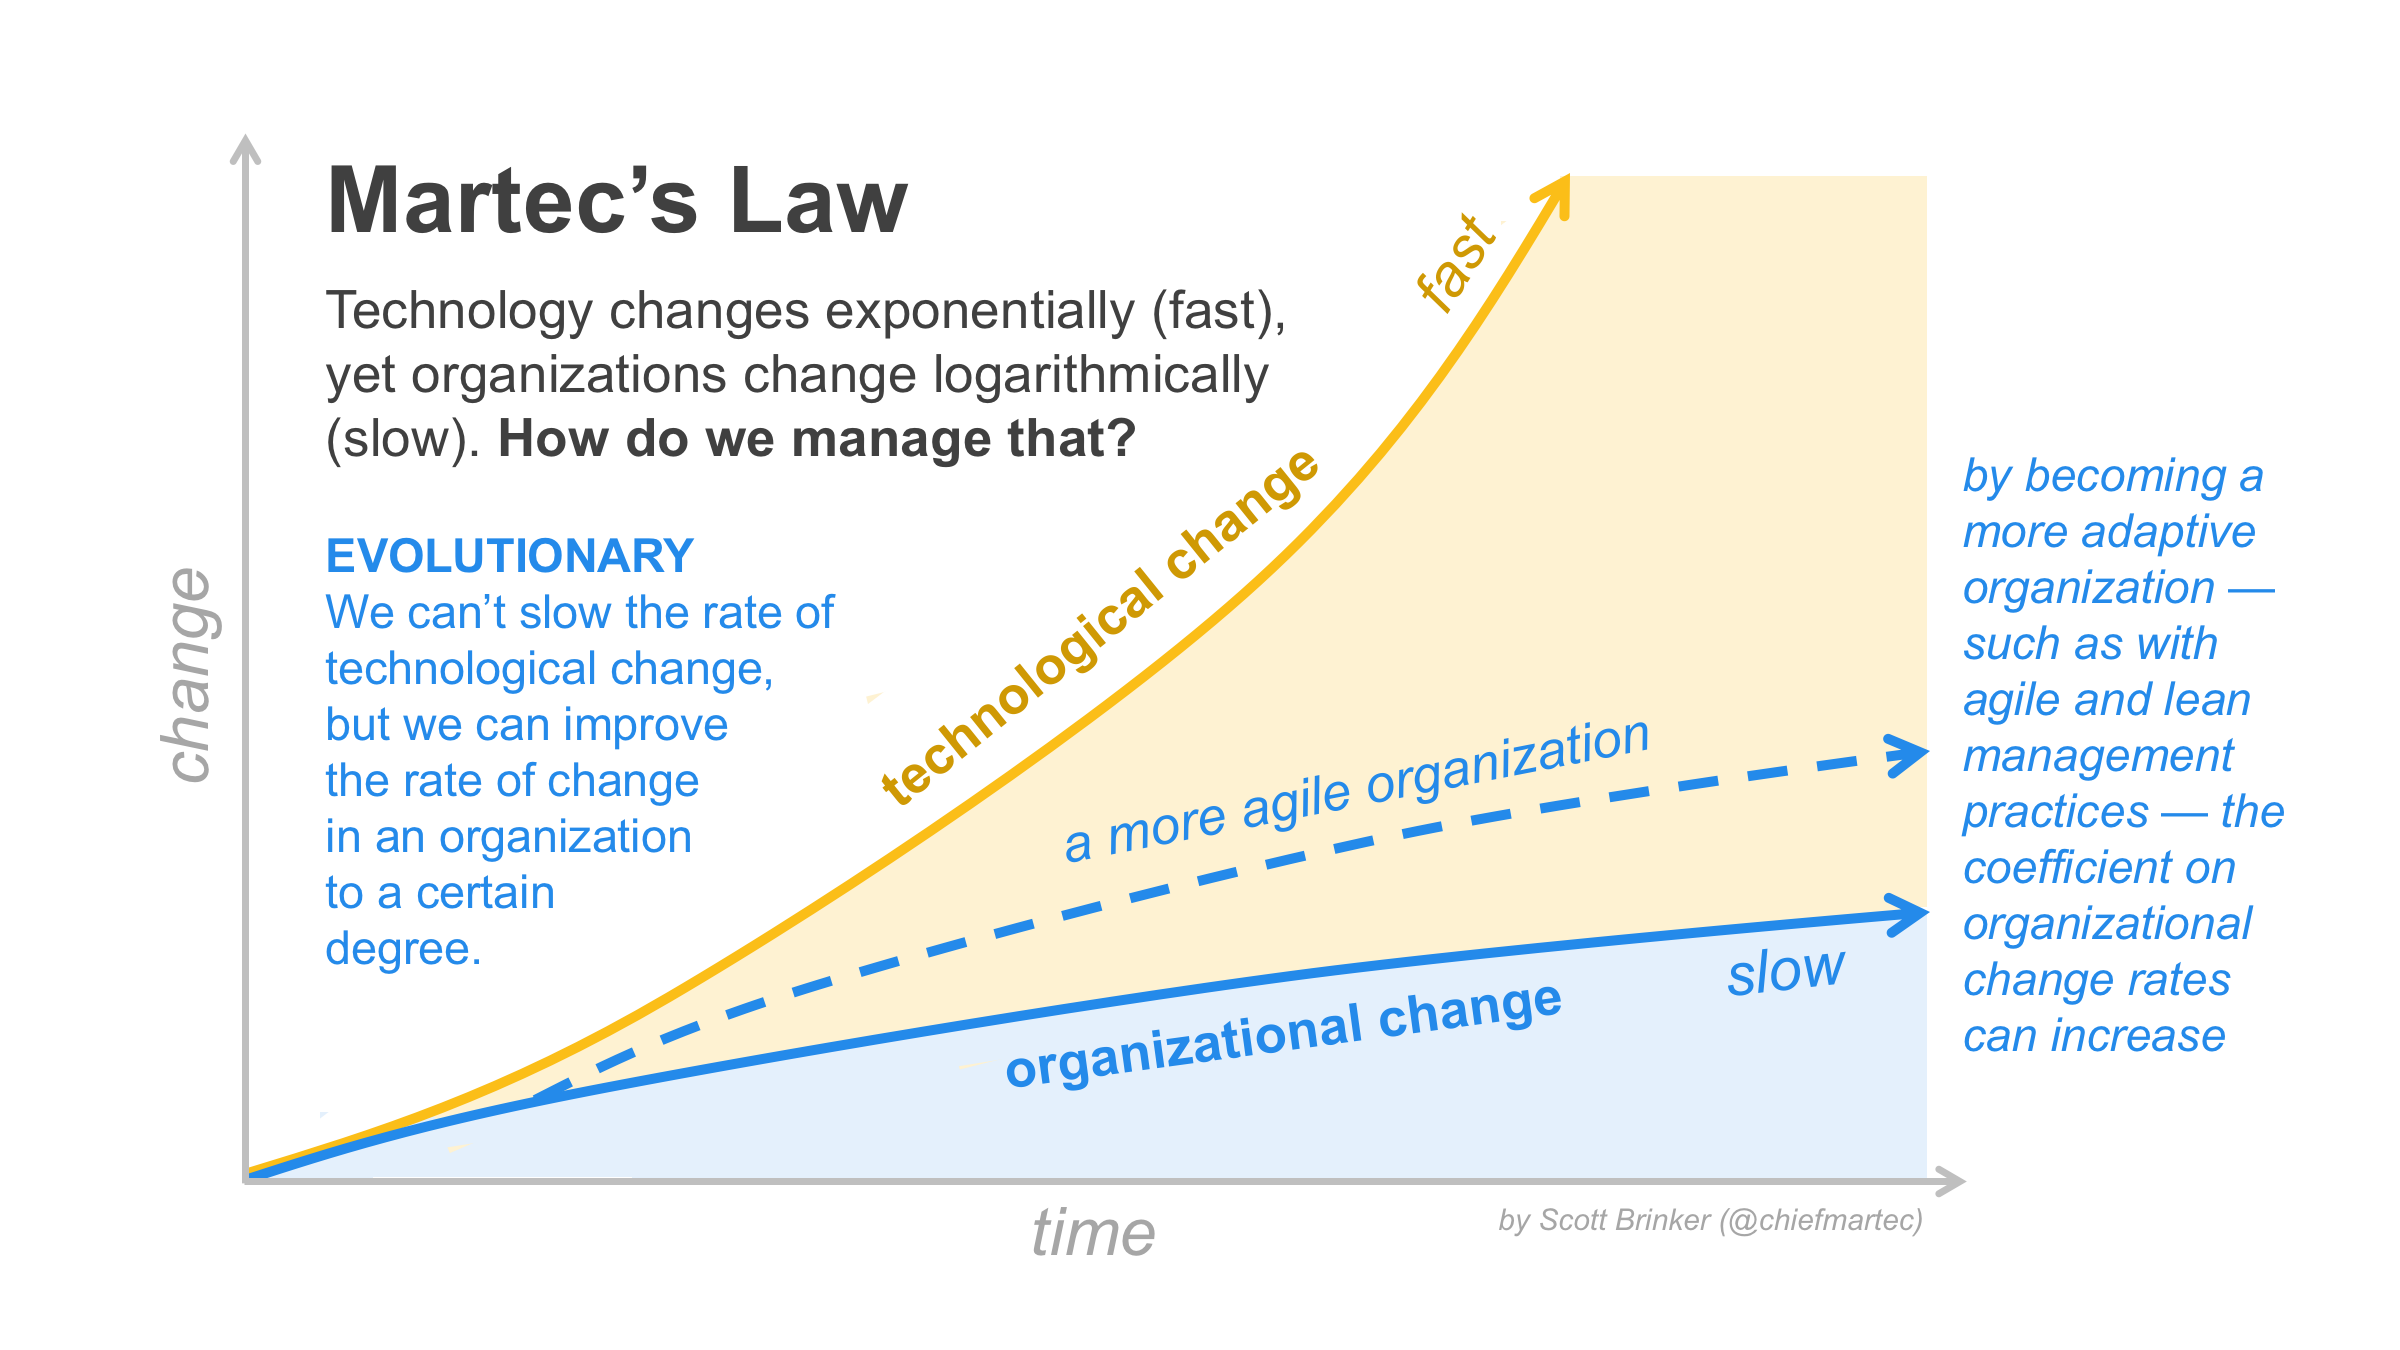 Martec's Law and the Advantage of Agility